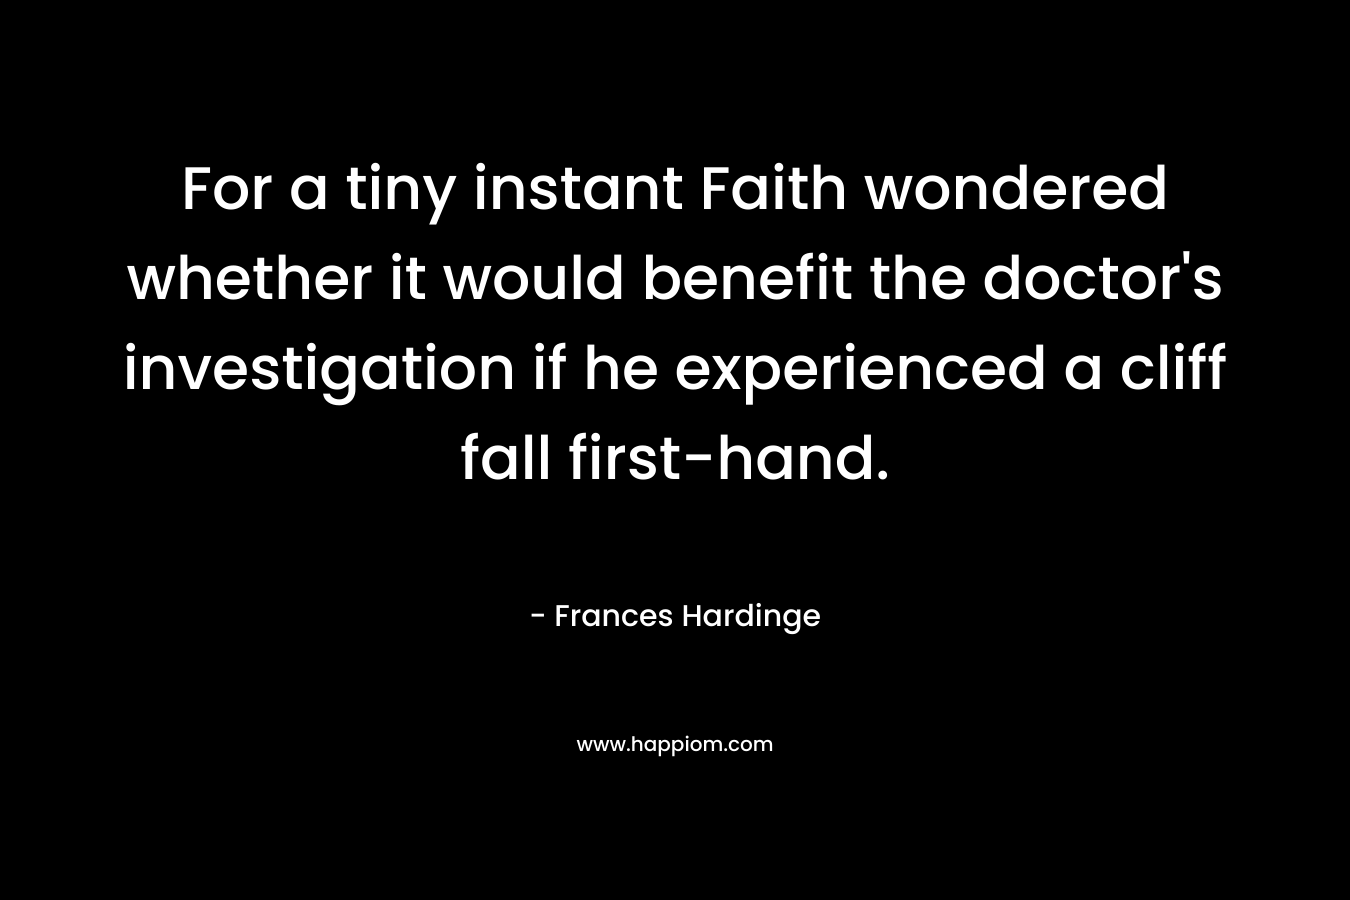 For a tiny instant Faith wondered whether it would benefit the doctor’s investigation if he experienced a cliff fall first-hand. – Frances Hardinge